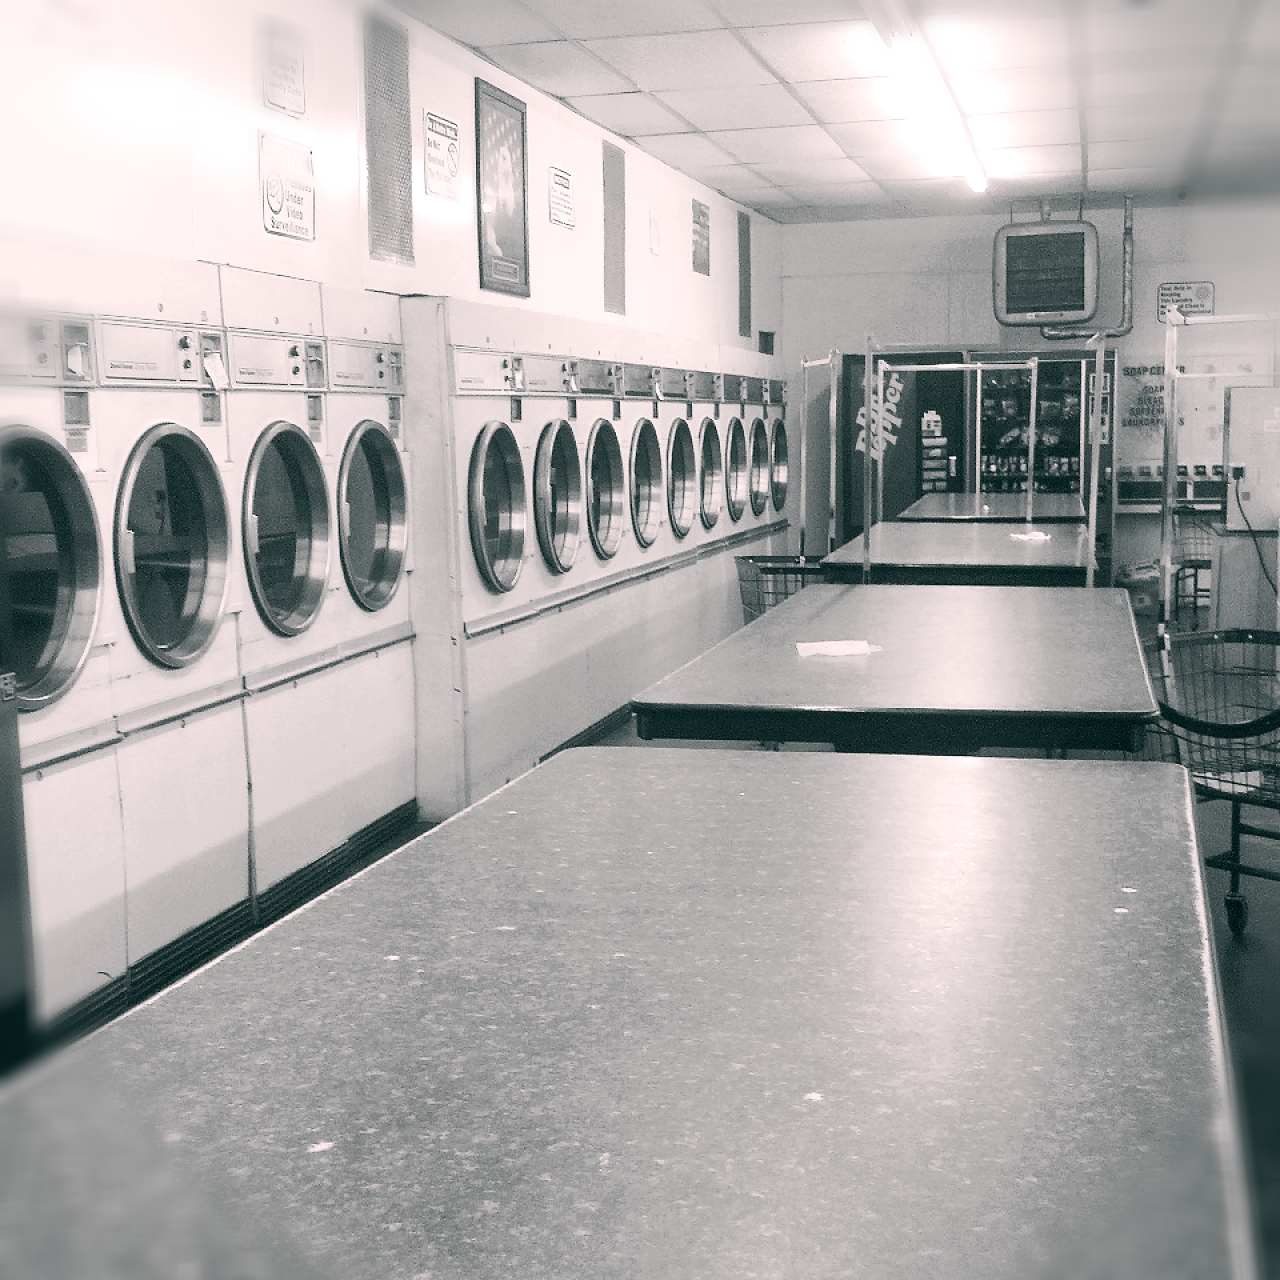 a very long line of washers and dryer machines